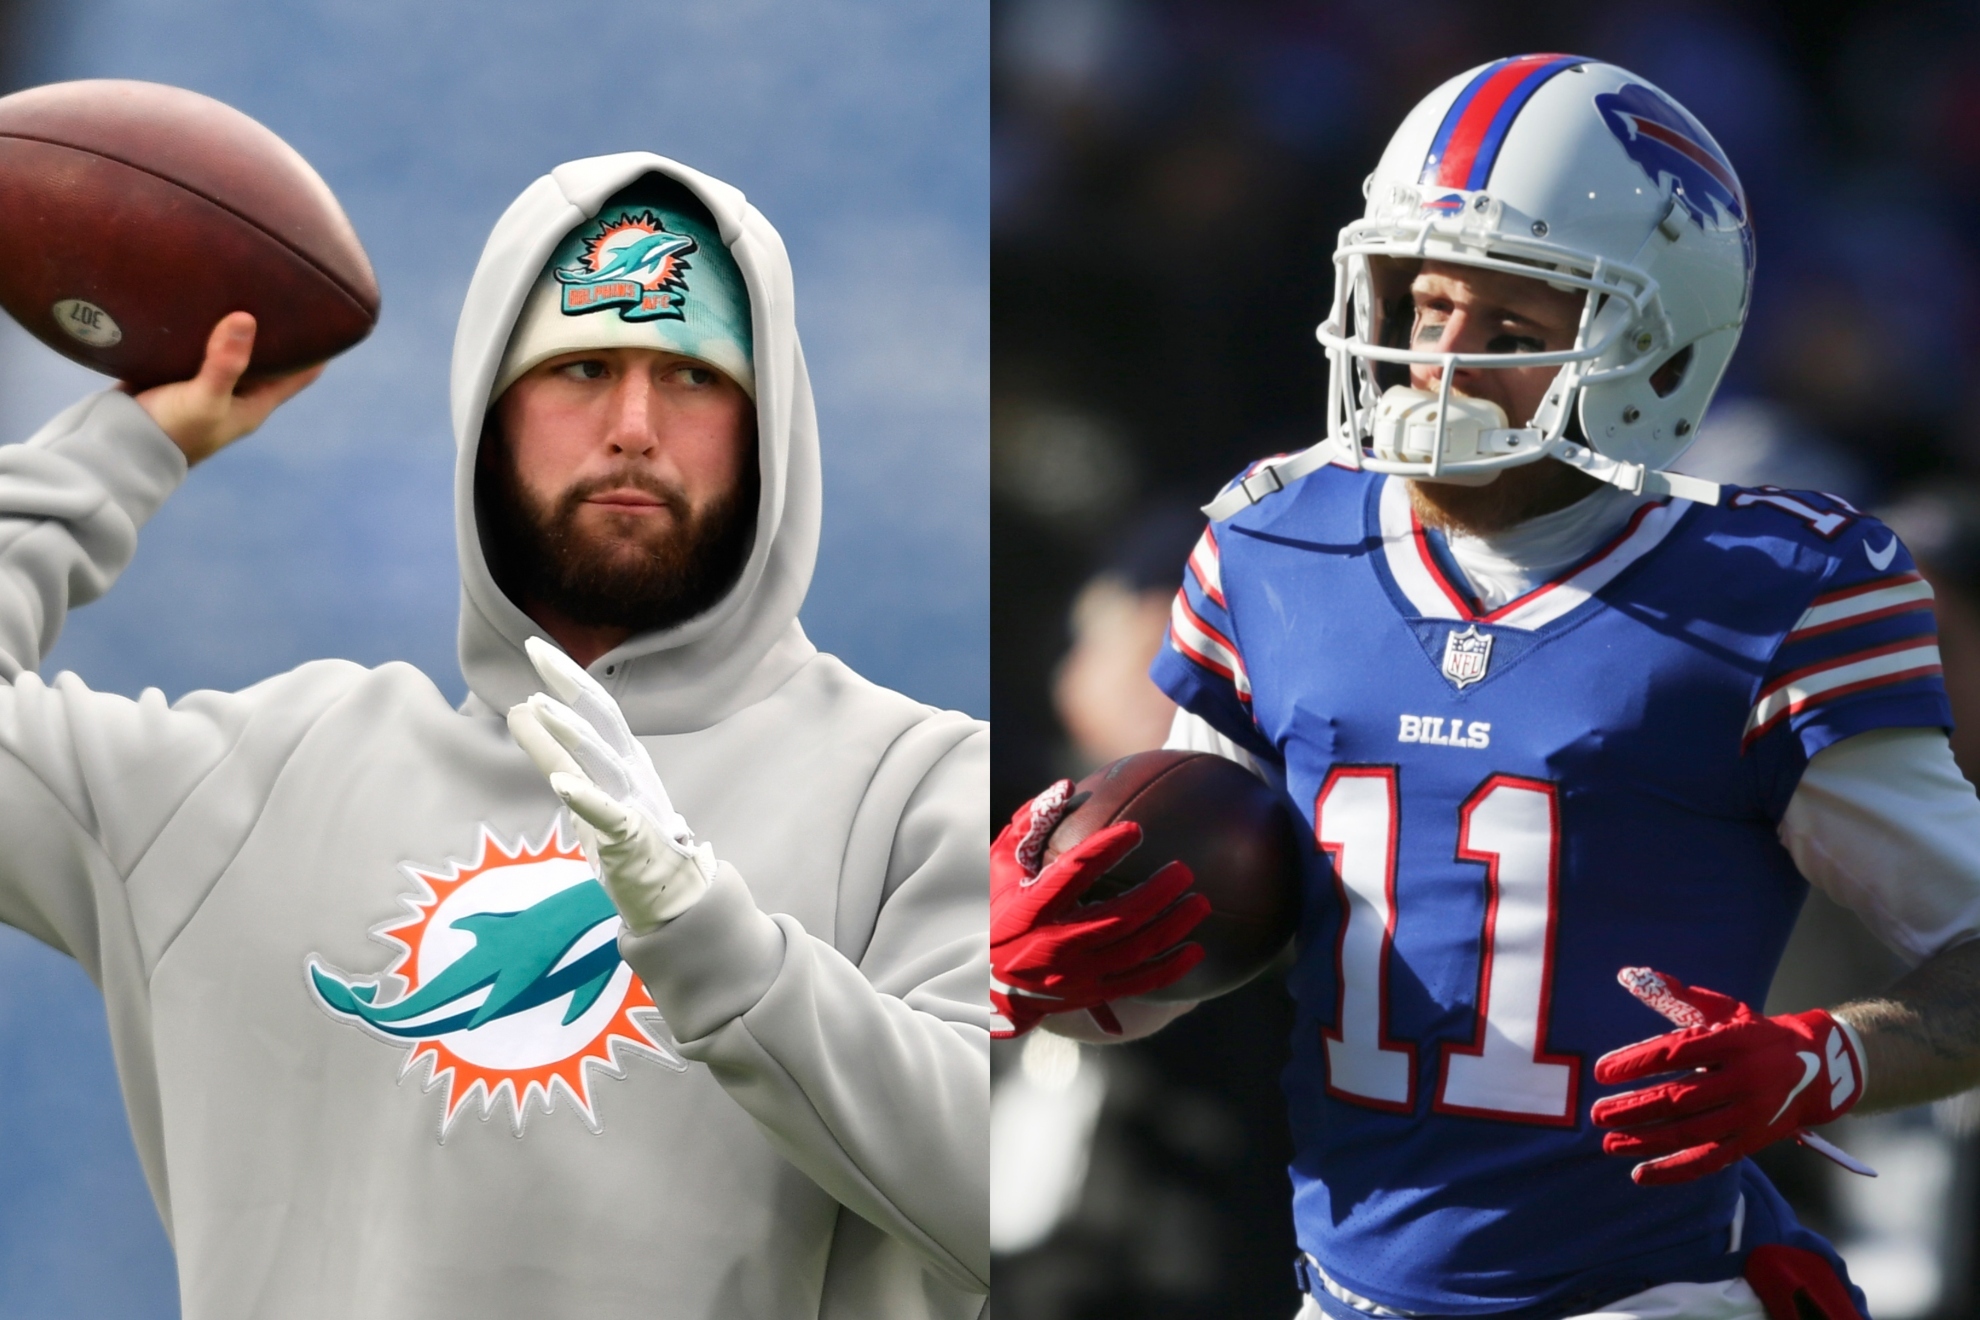 The Dolphins and the Bills will go against each other today